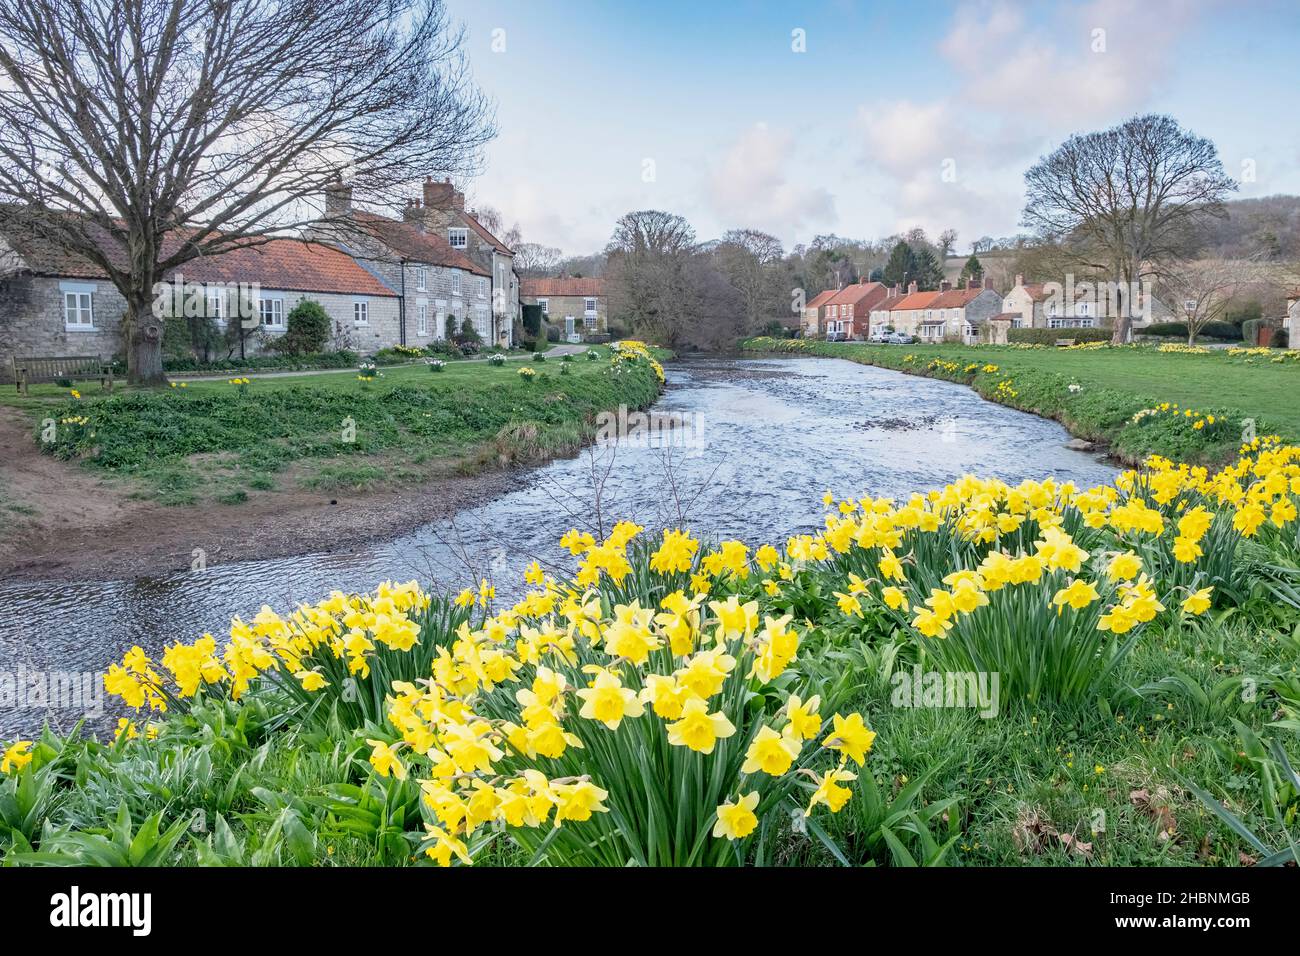 Spring daffodils by the banks of the Seven river in Sinnington, a small village in Ryedale, North Yorkshire Stock Photo